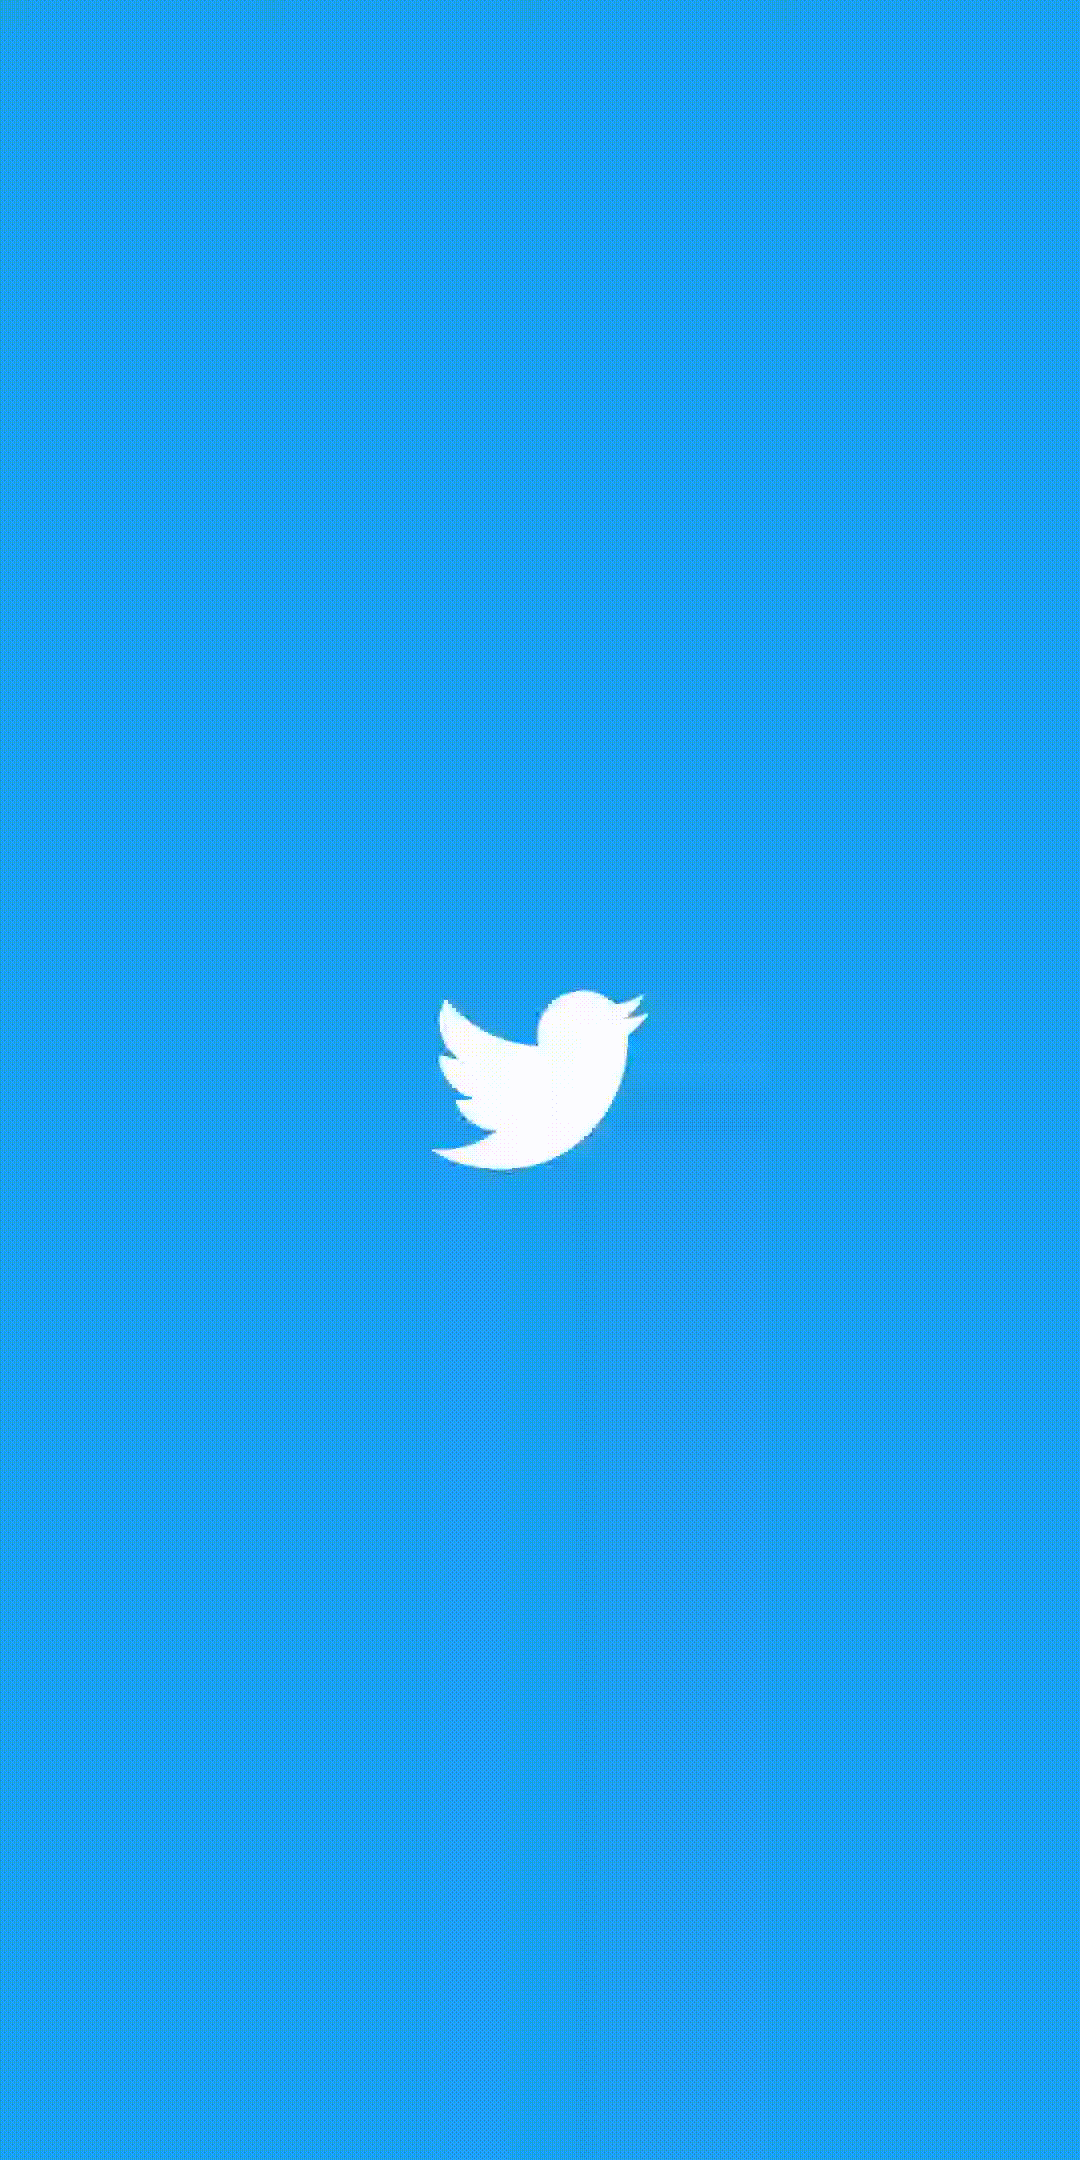 Android MotionLayout: Creating the Twitter splash screen in the simplest  way possible (Part I)